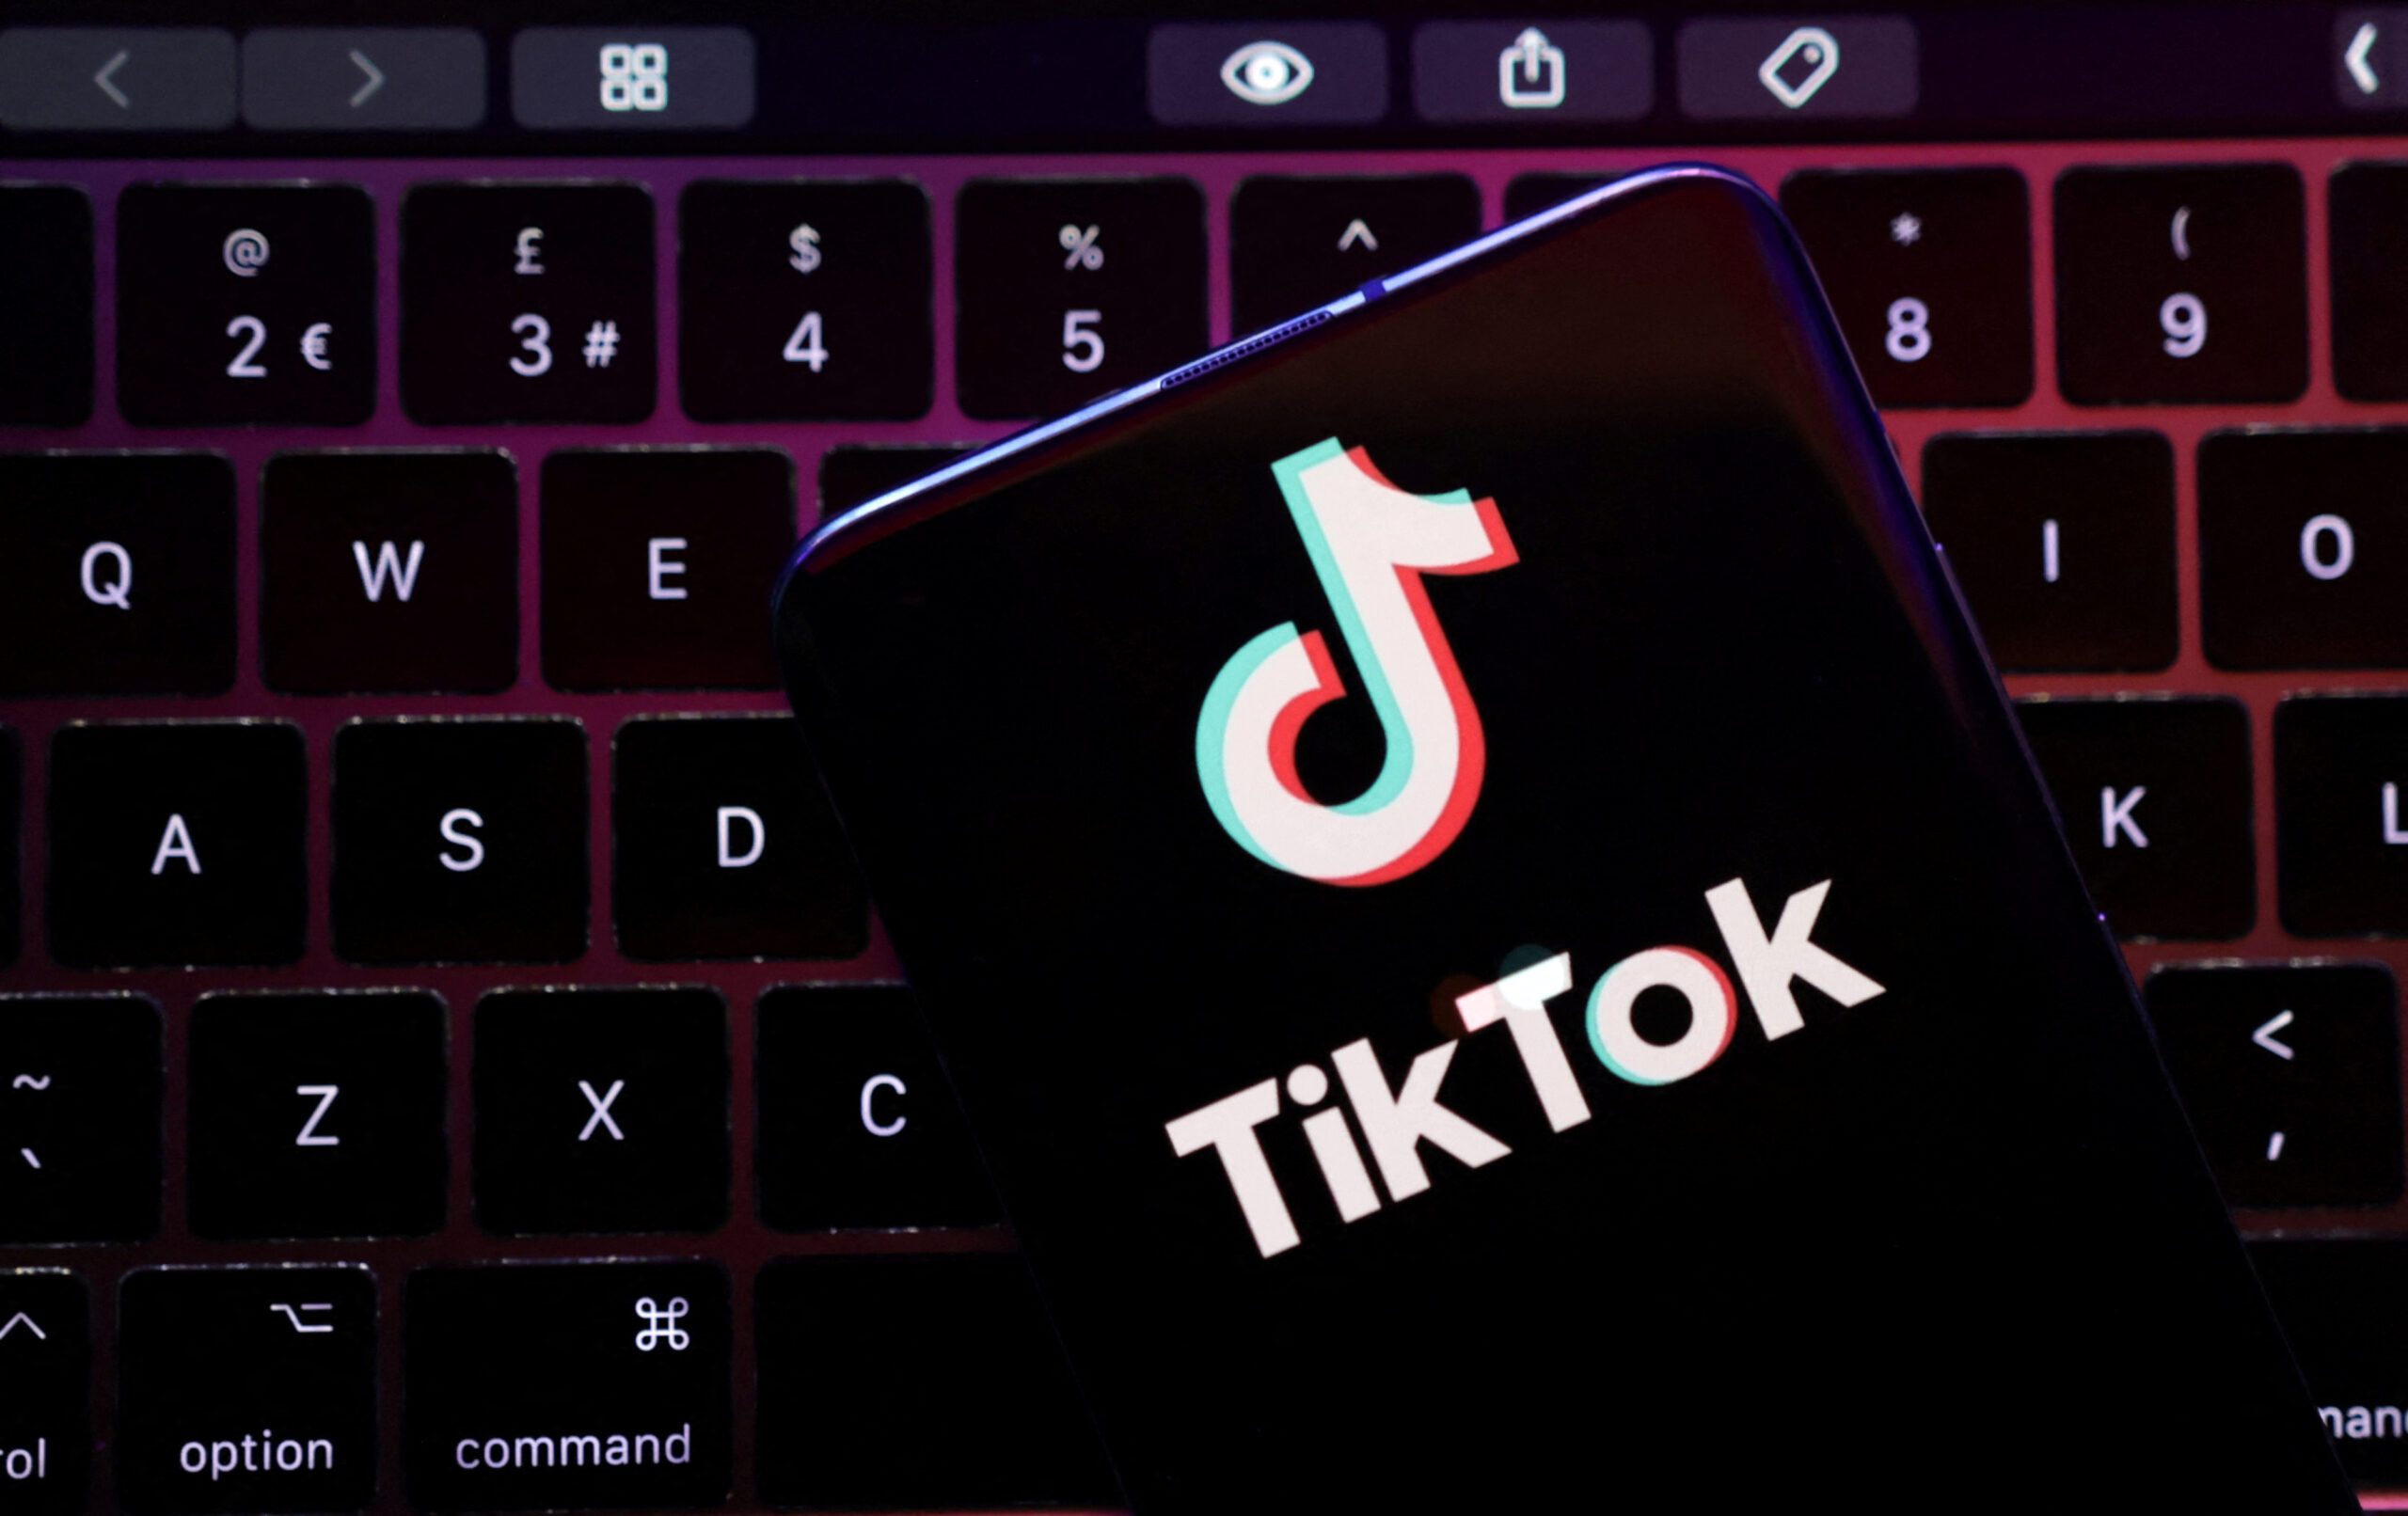 TikTok-Tokopedia consolidation could change the game for GoTo, say analysts